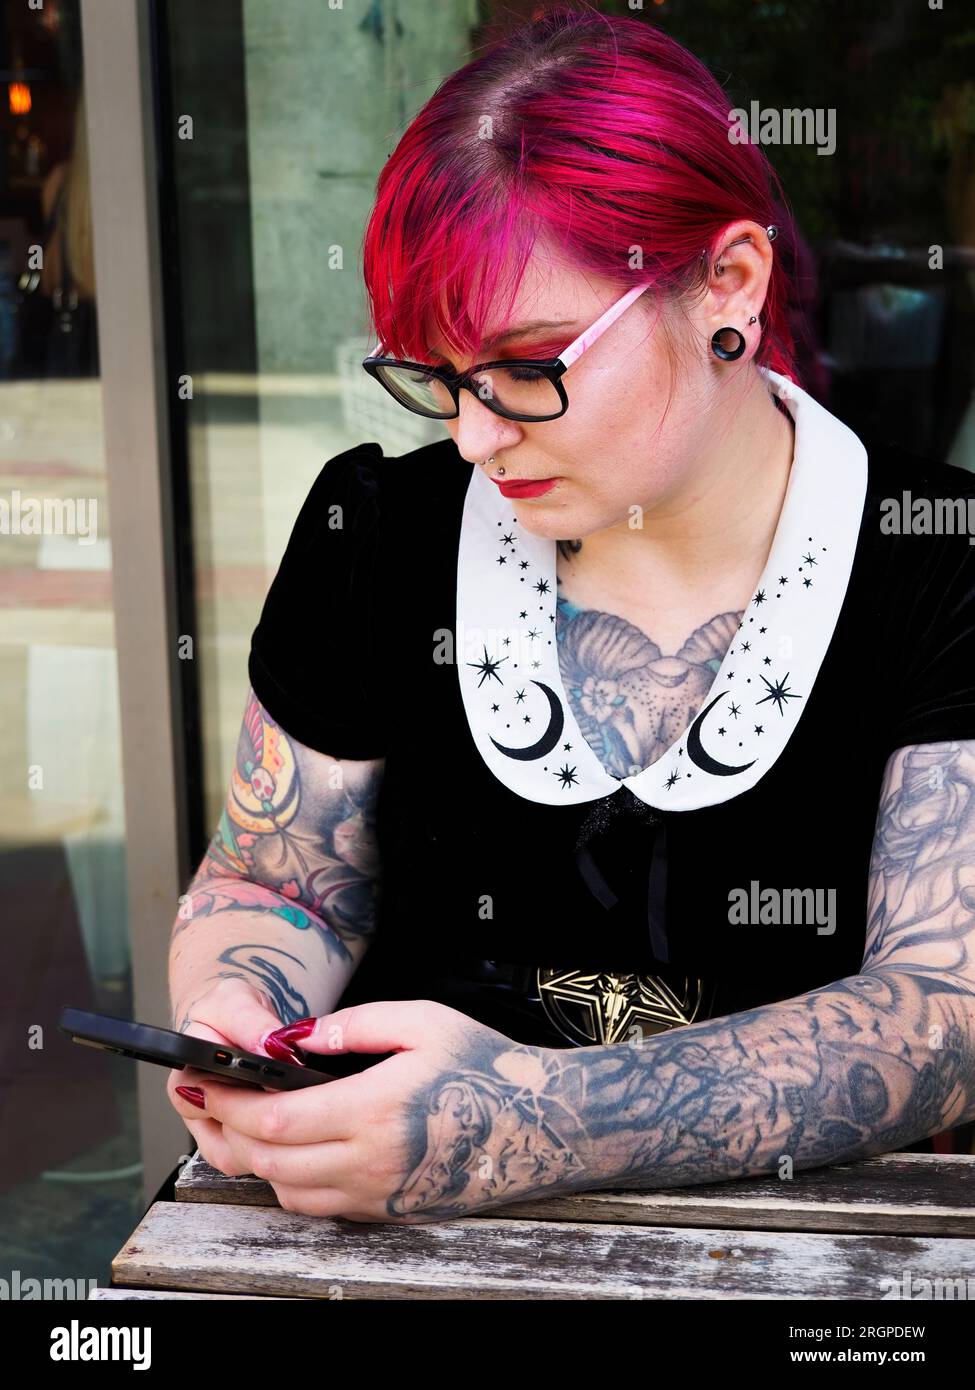 Woman in her mid twenties with dyed red hair and tattoos wearing glasses using a smartphone in Leeds West Yorkshire England Stock Photo